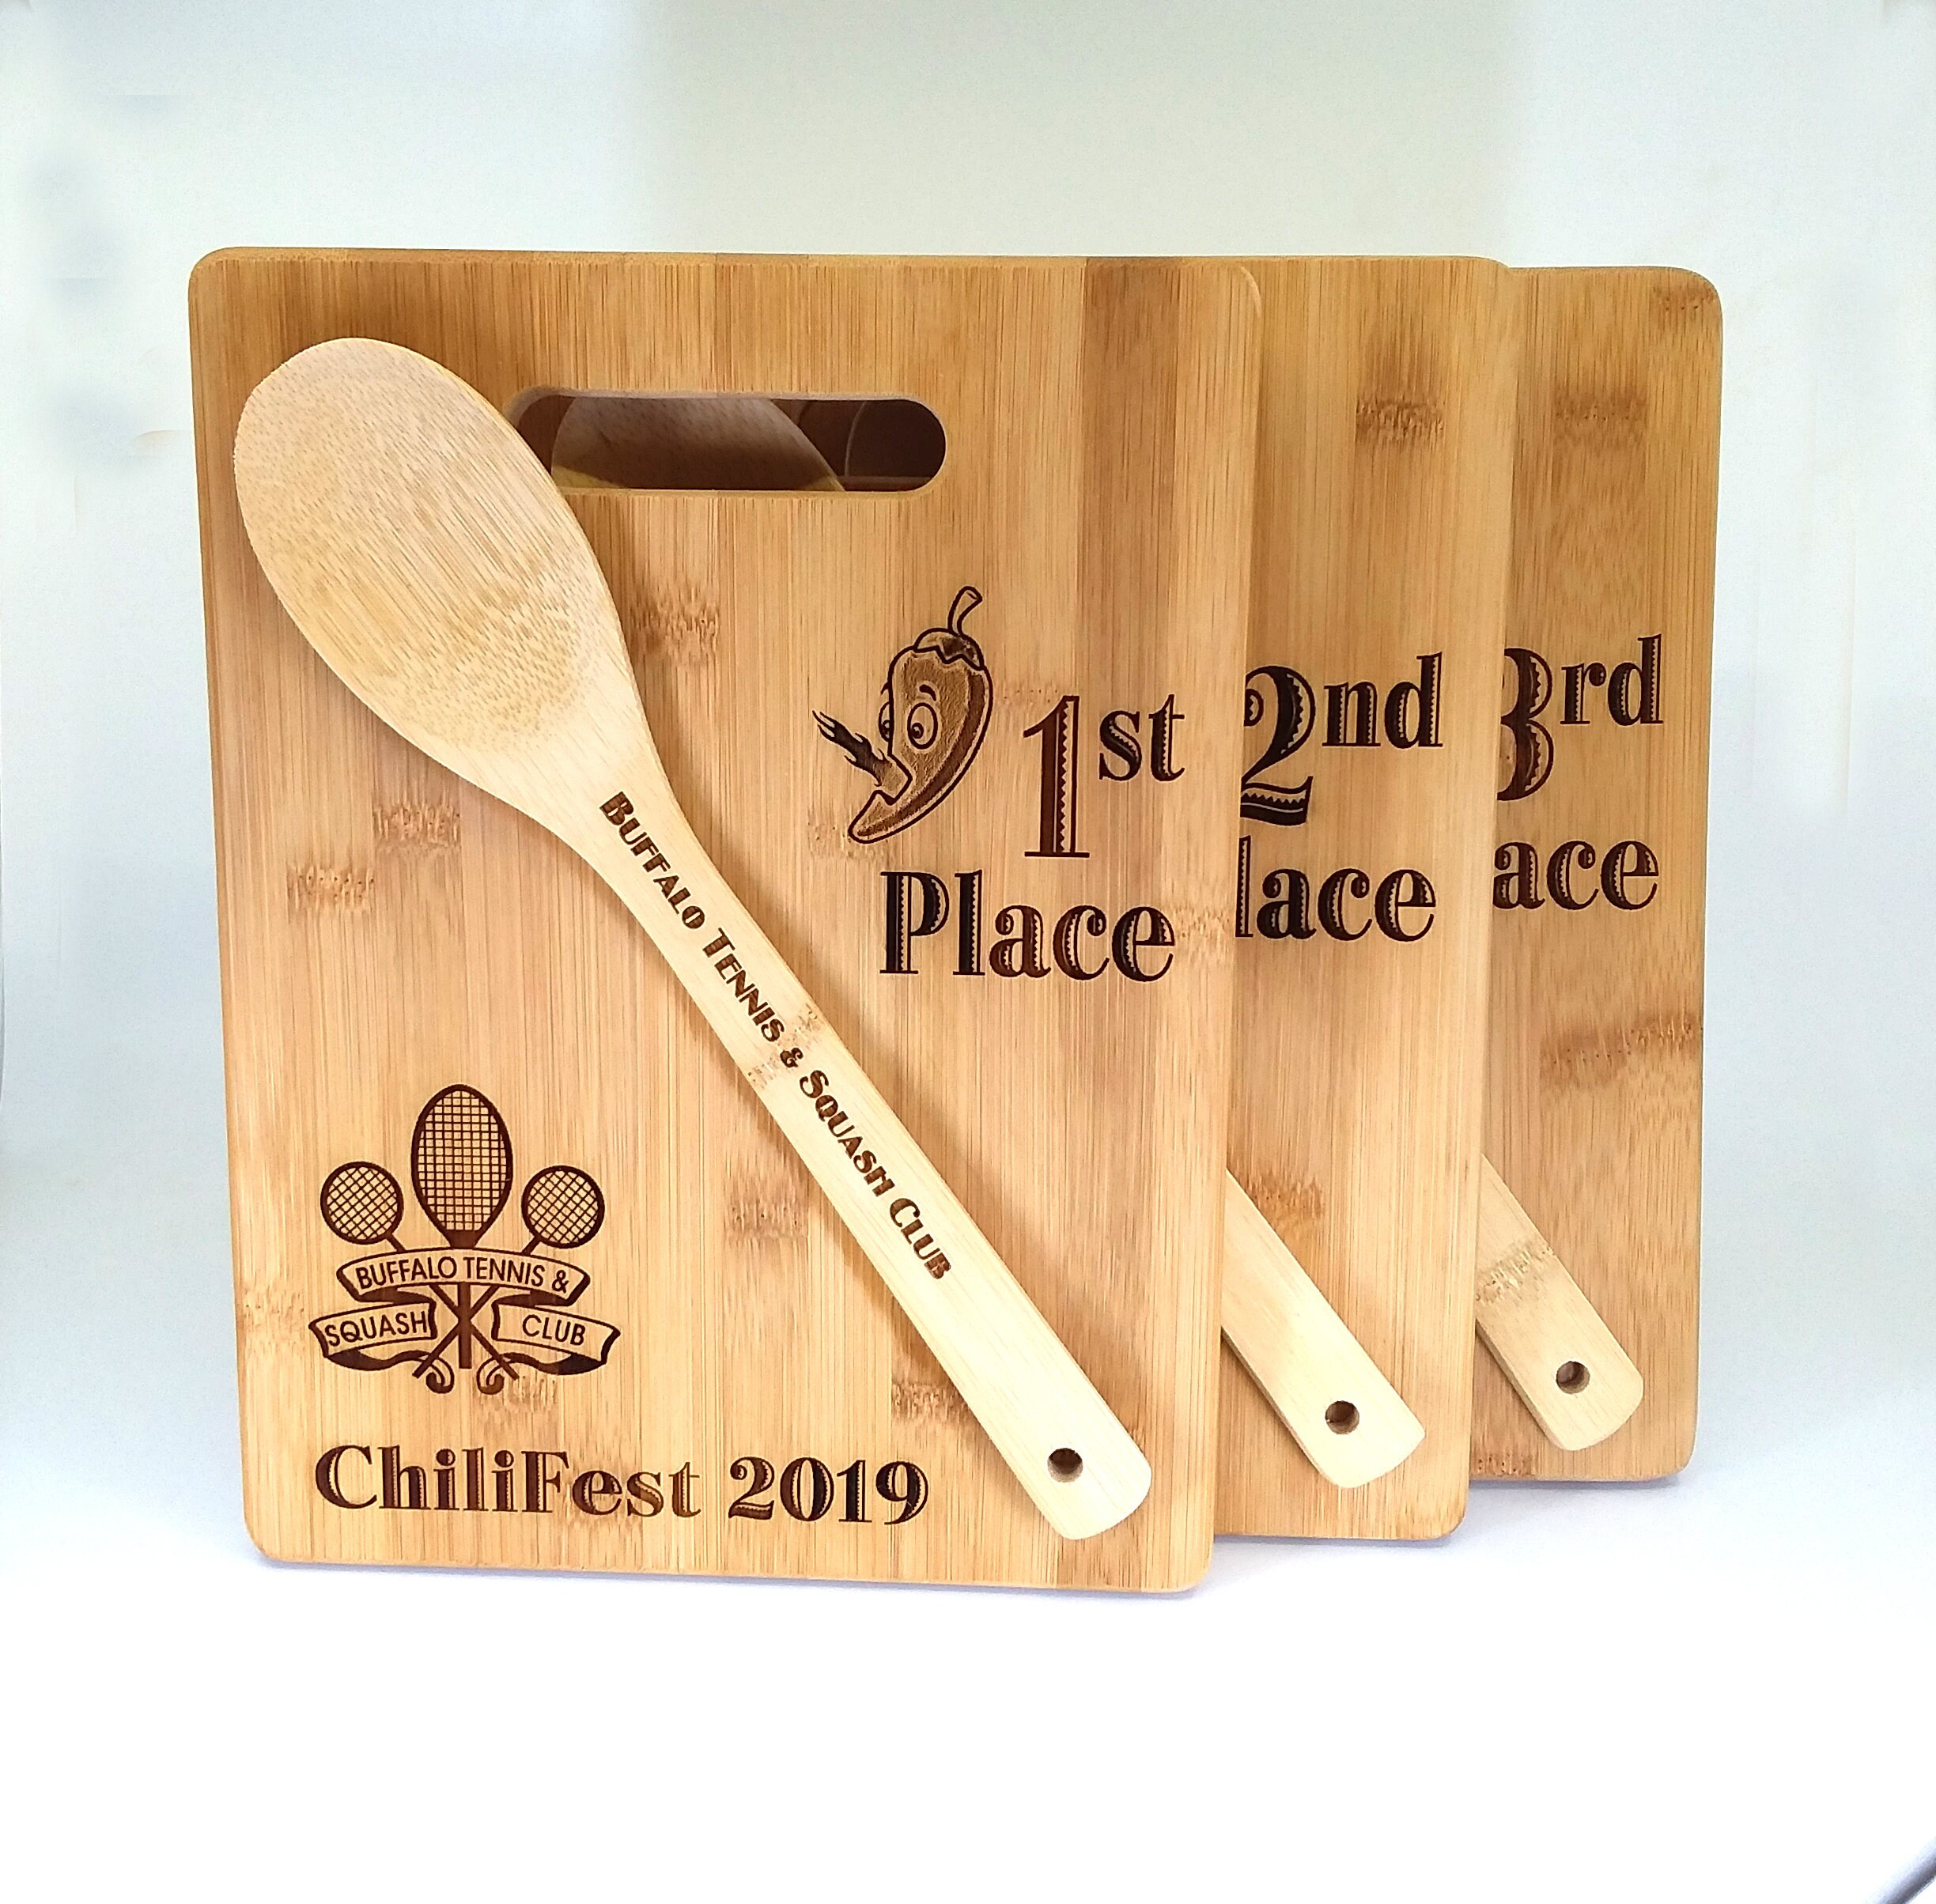 Chili Cook Off, 3 Award Boards, Bake Wood Plaque, Cooking Contest Trophy, Off Trophy